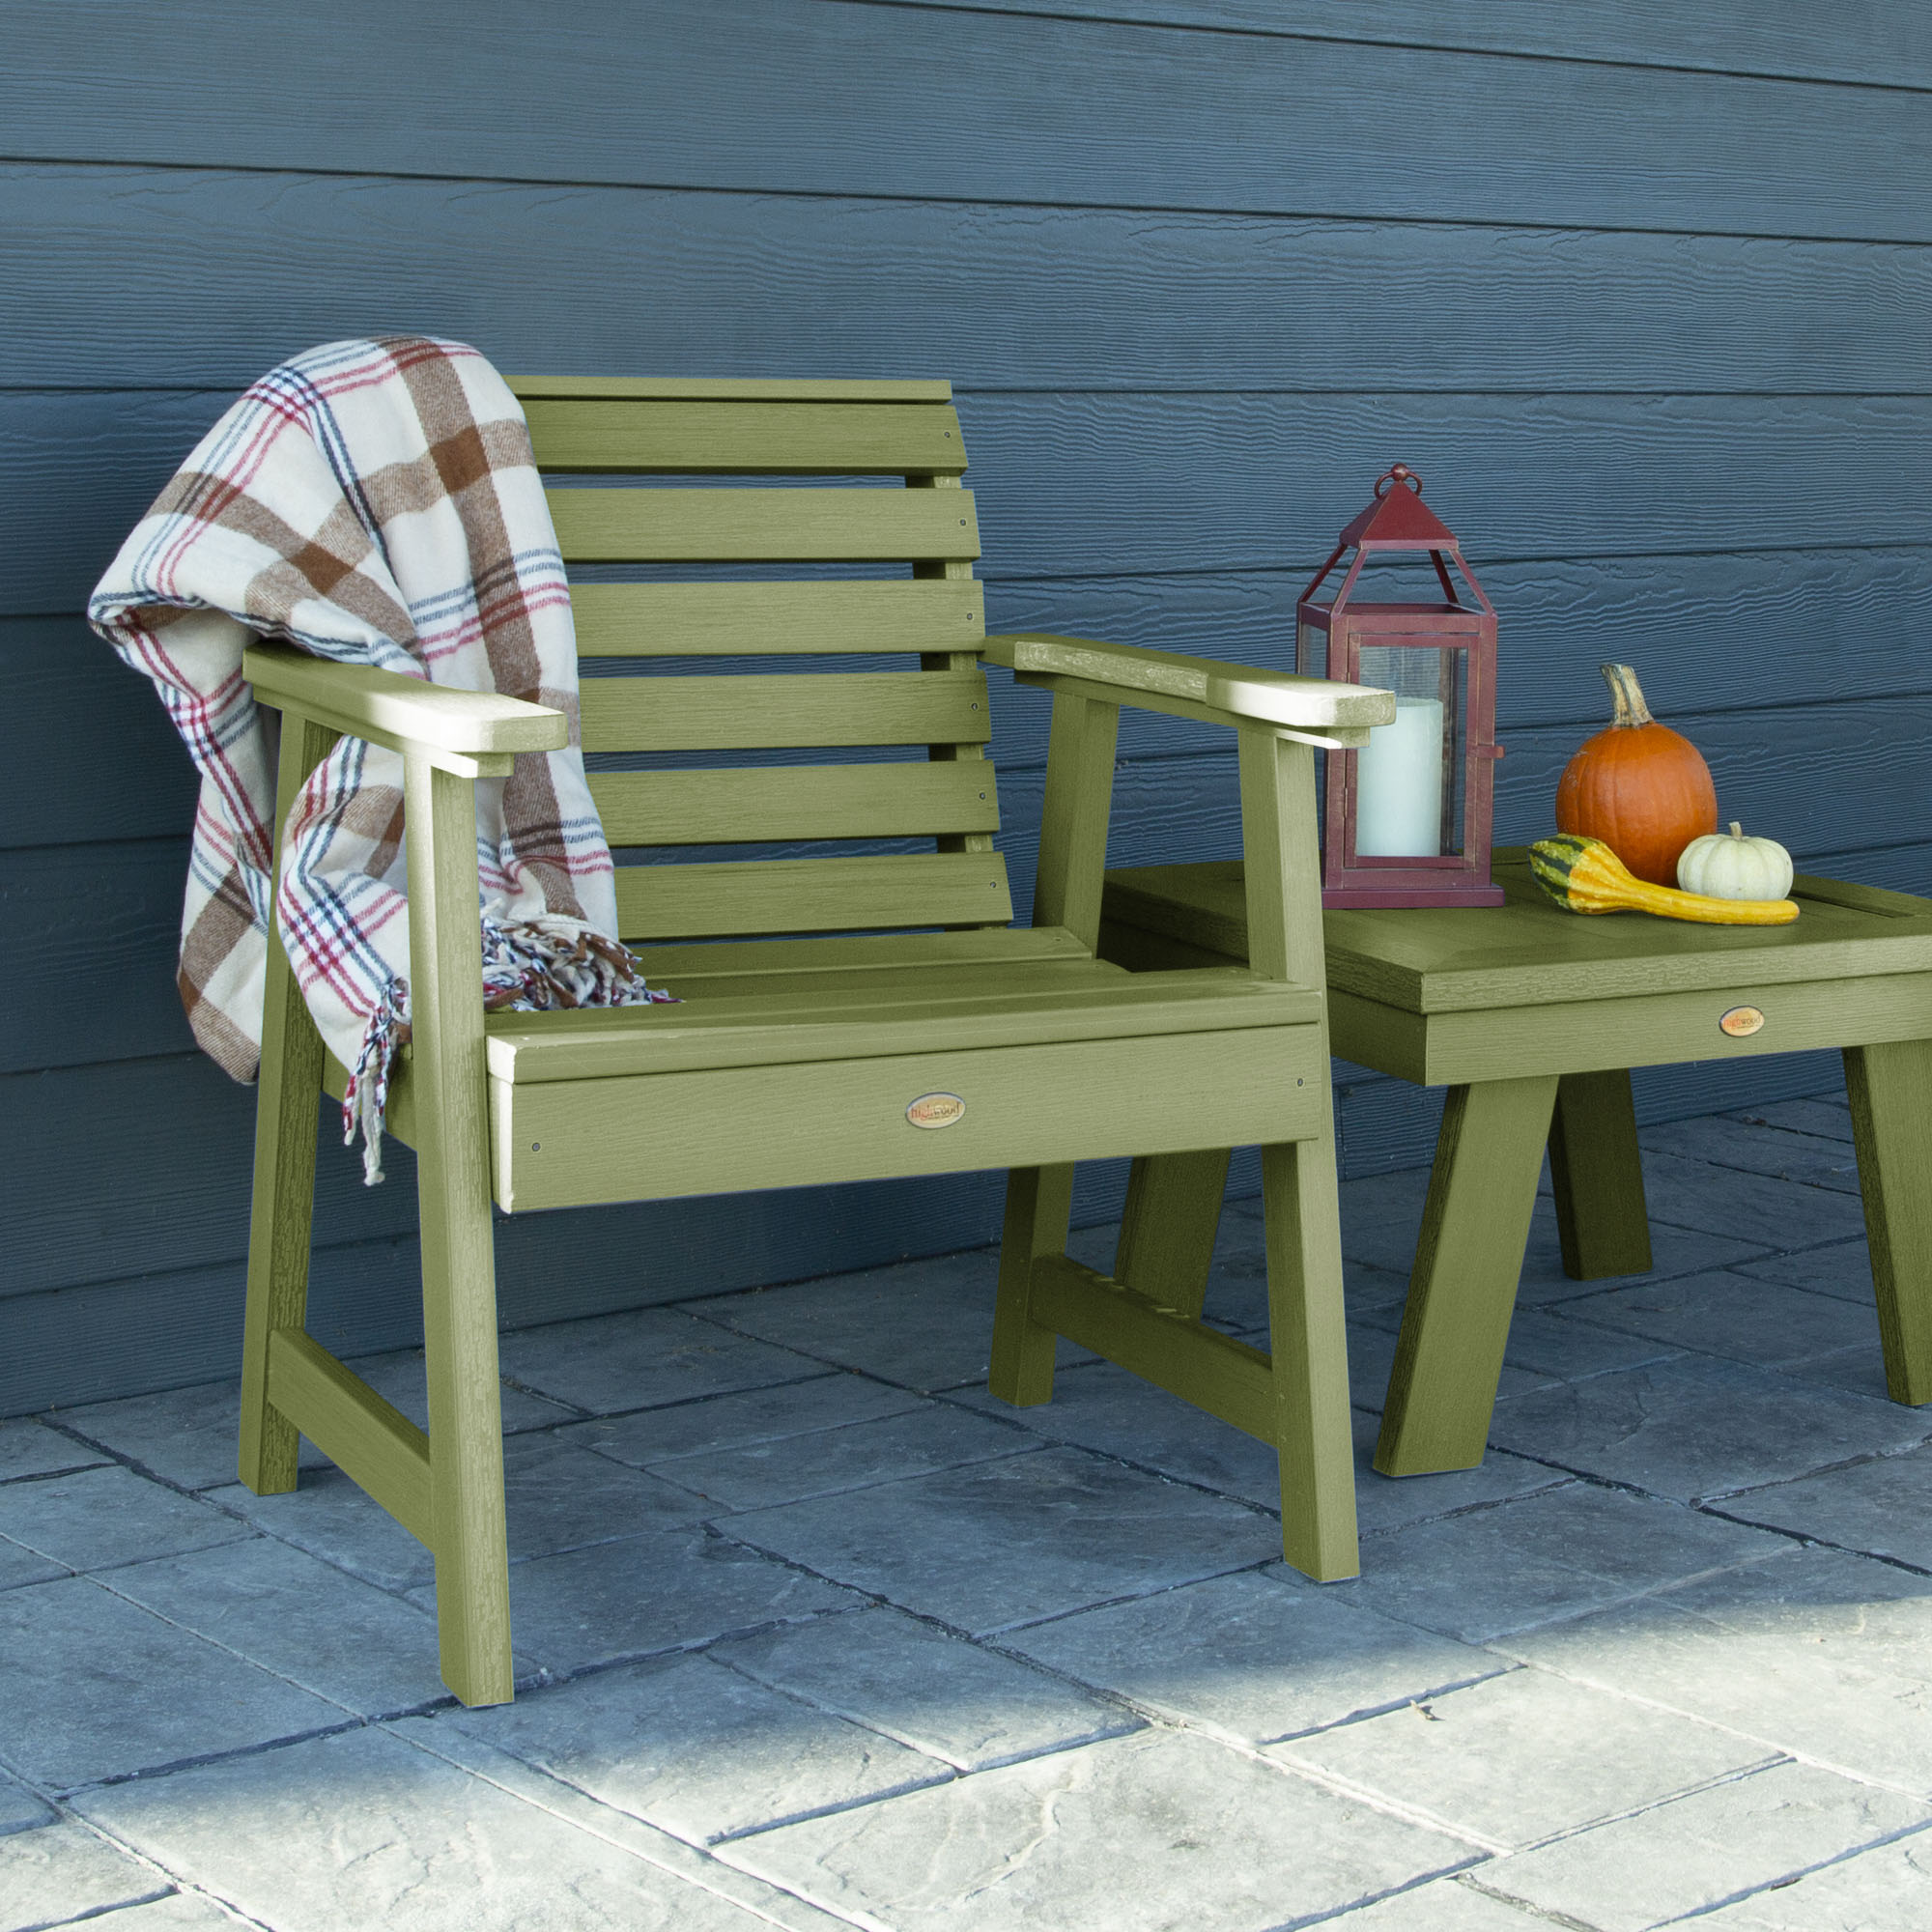 2 Weatherly Garden Chairs with 1 Square Side Table - image 2 of 2